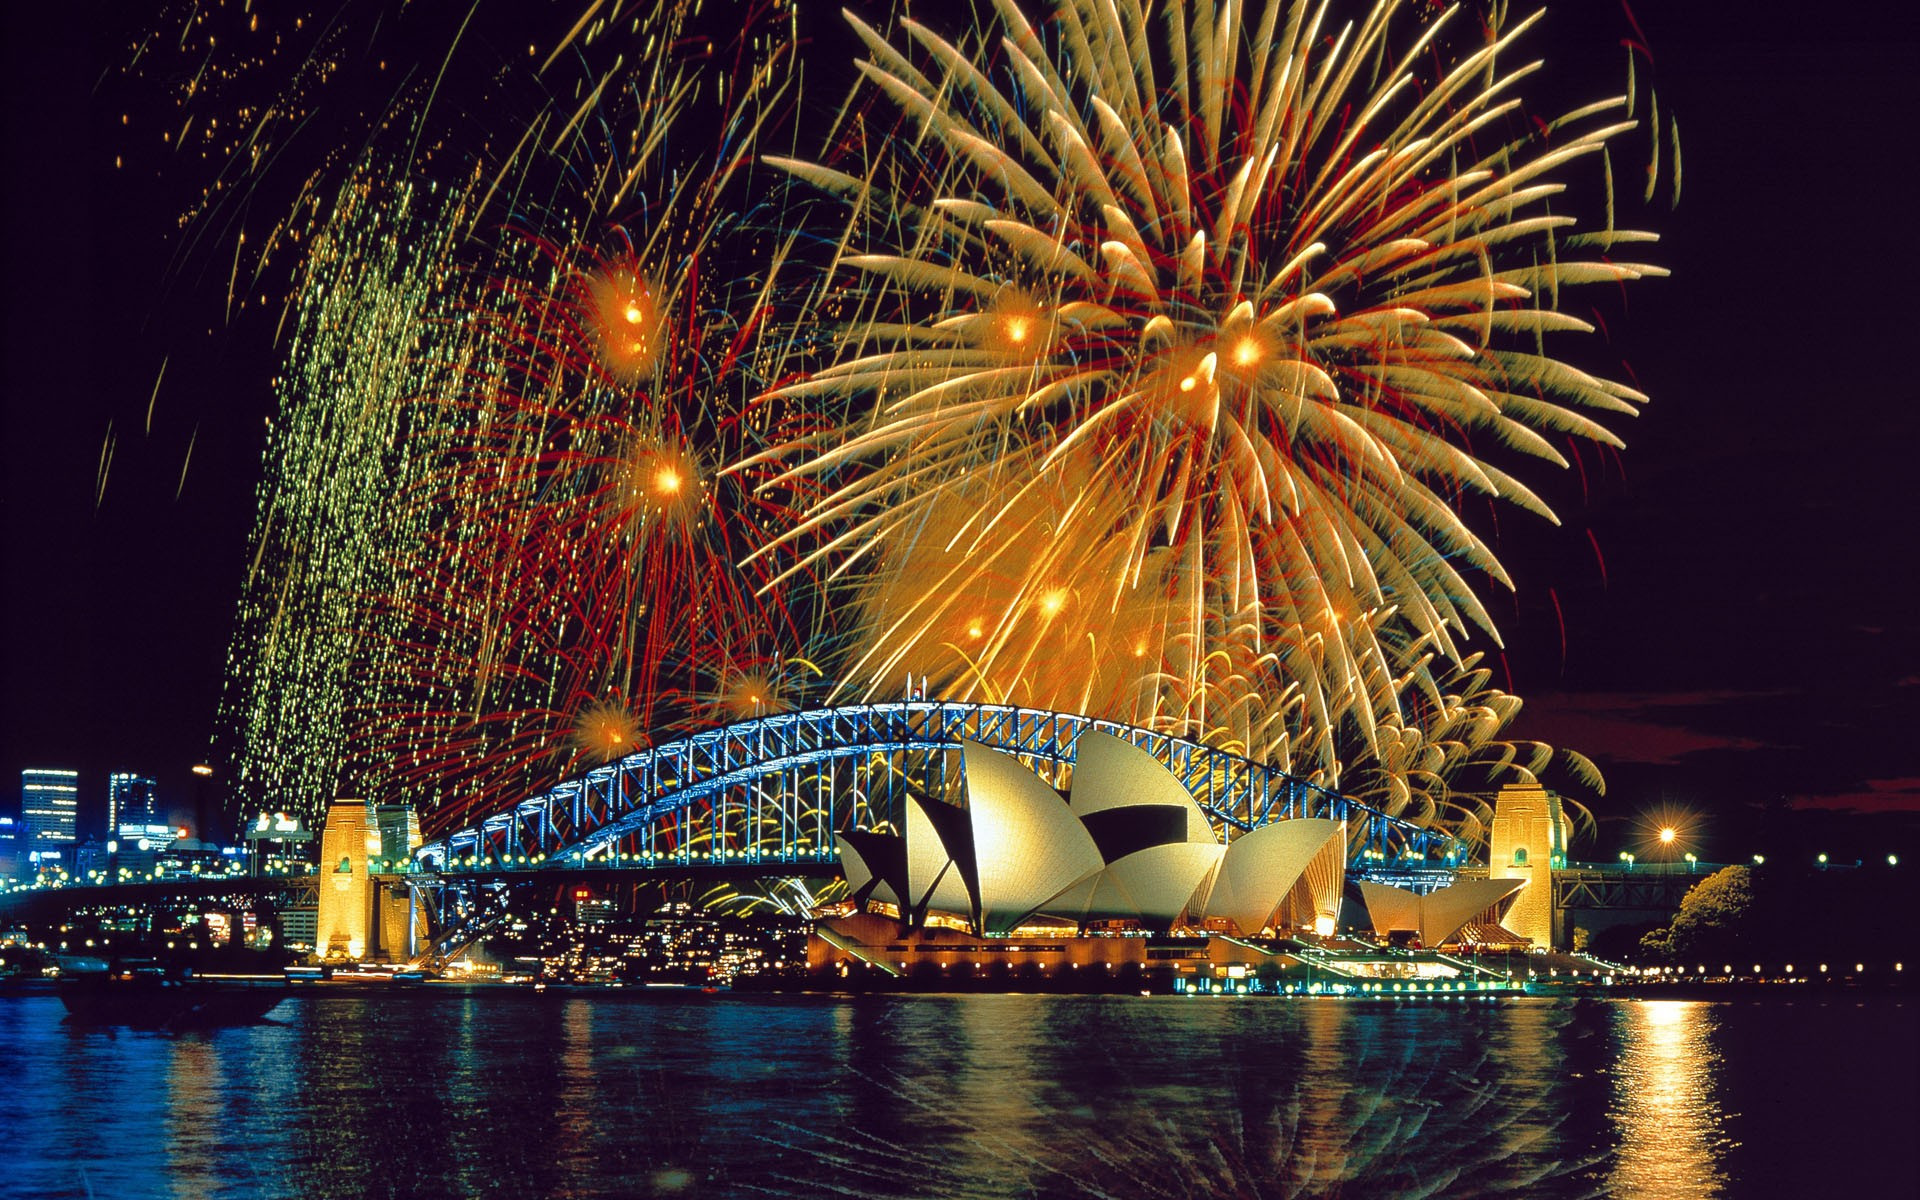 Fireworks at the Sydney Opera House wallpaper   606011